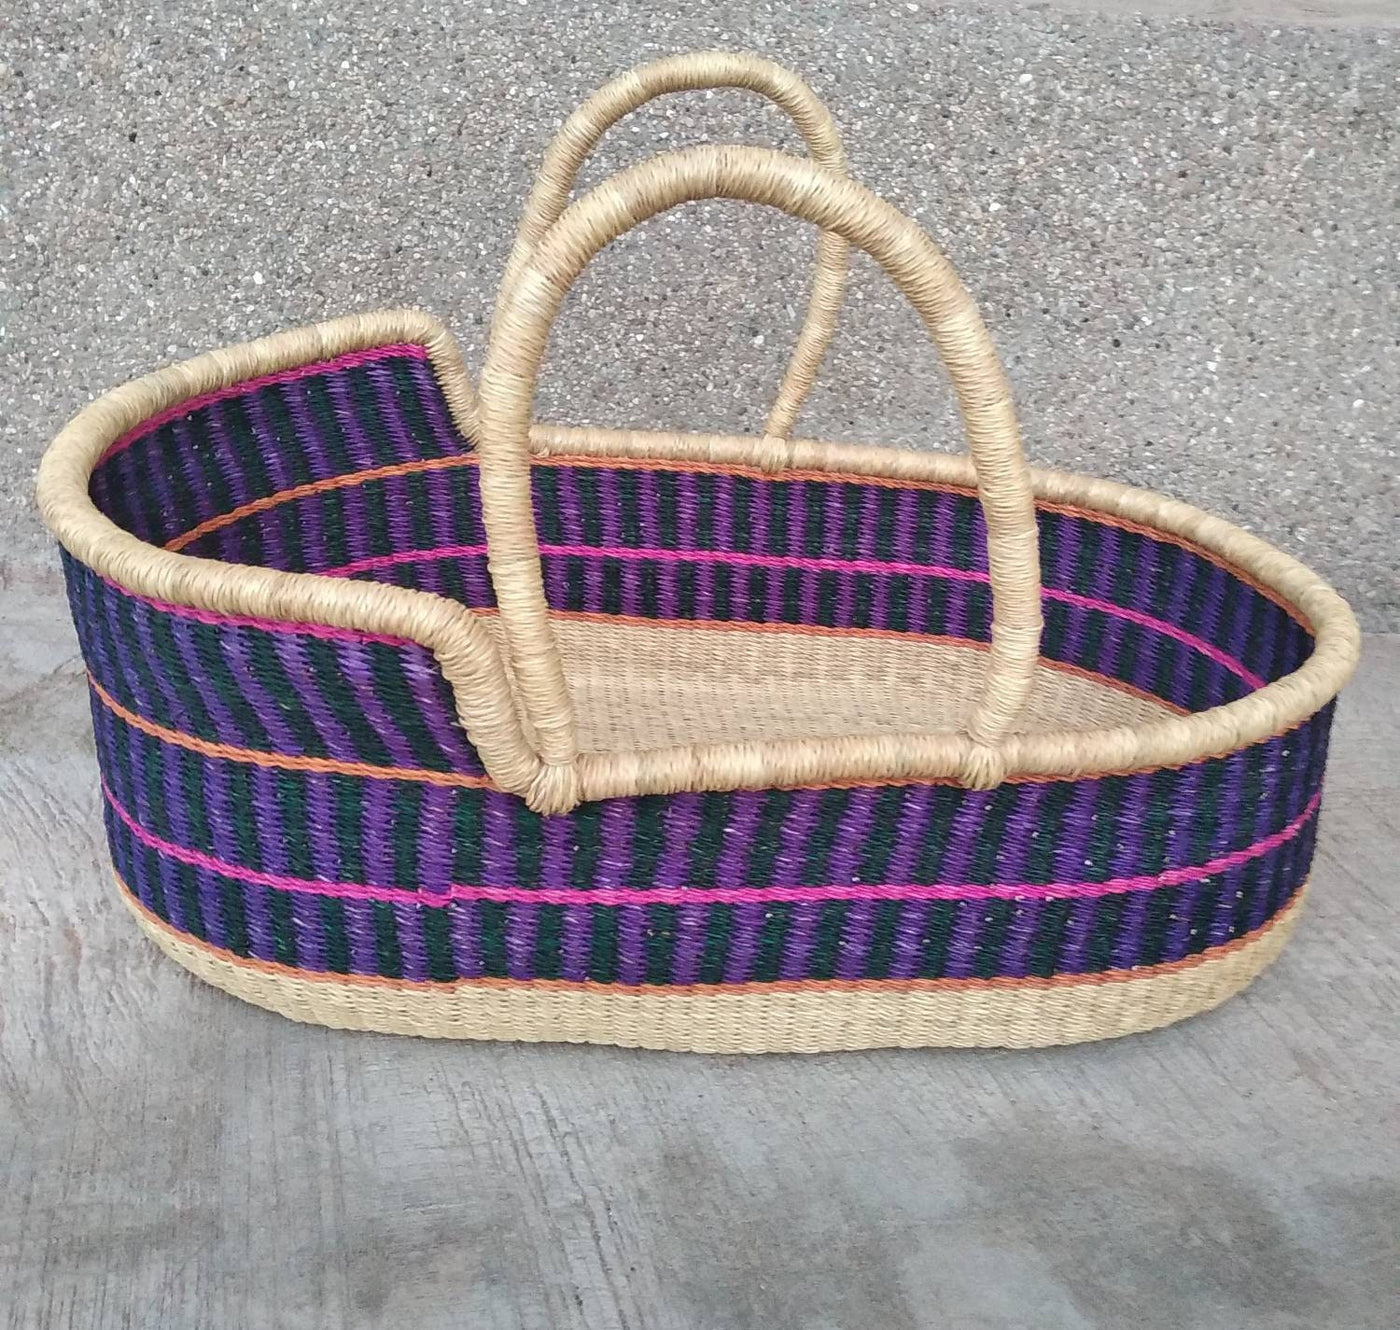 Baby bedding | Co sleeper | Baby nest | African basket | Wicker basket | Moses basket with leather handle | Mothers day gift | baby mobile - AfricanheritageGH